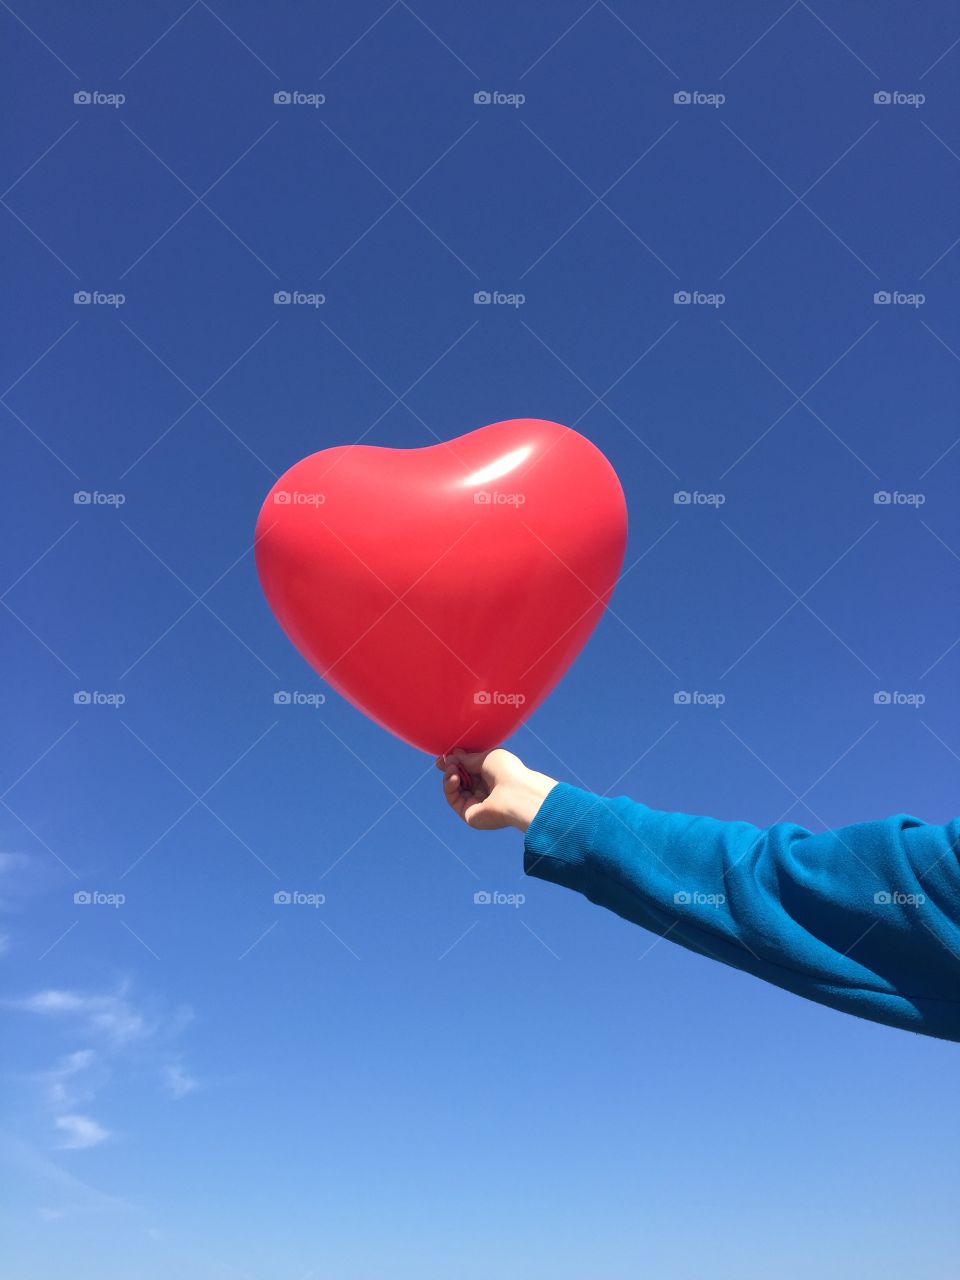 Person's hand holding heart shape balloon